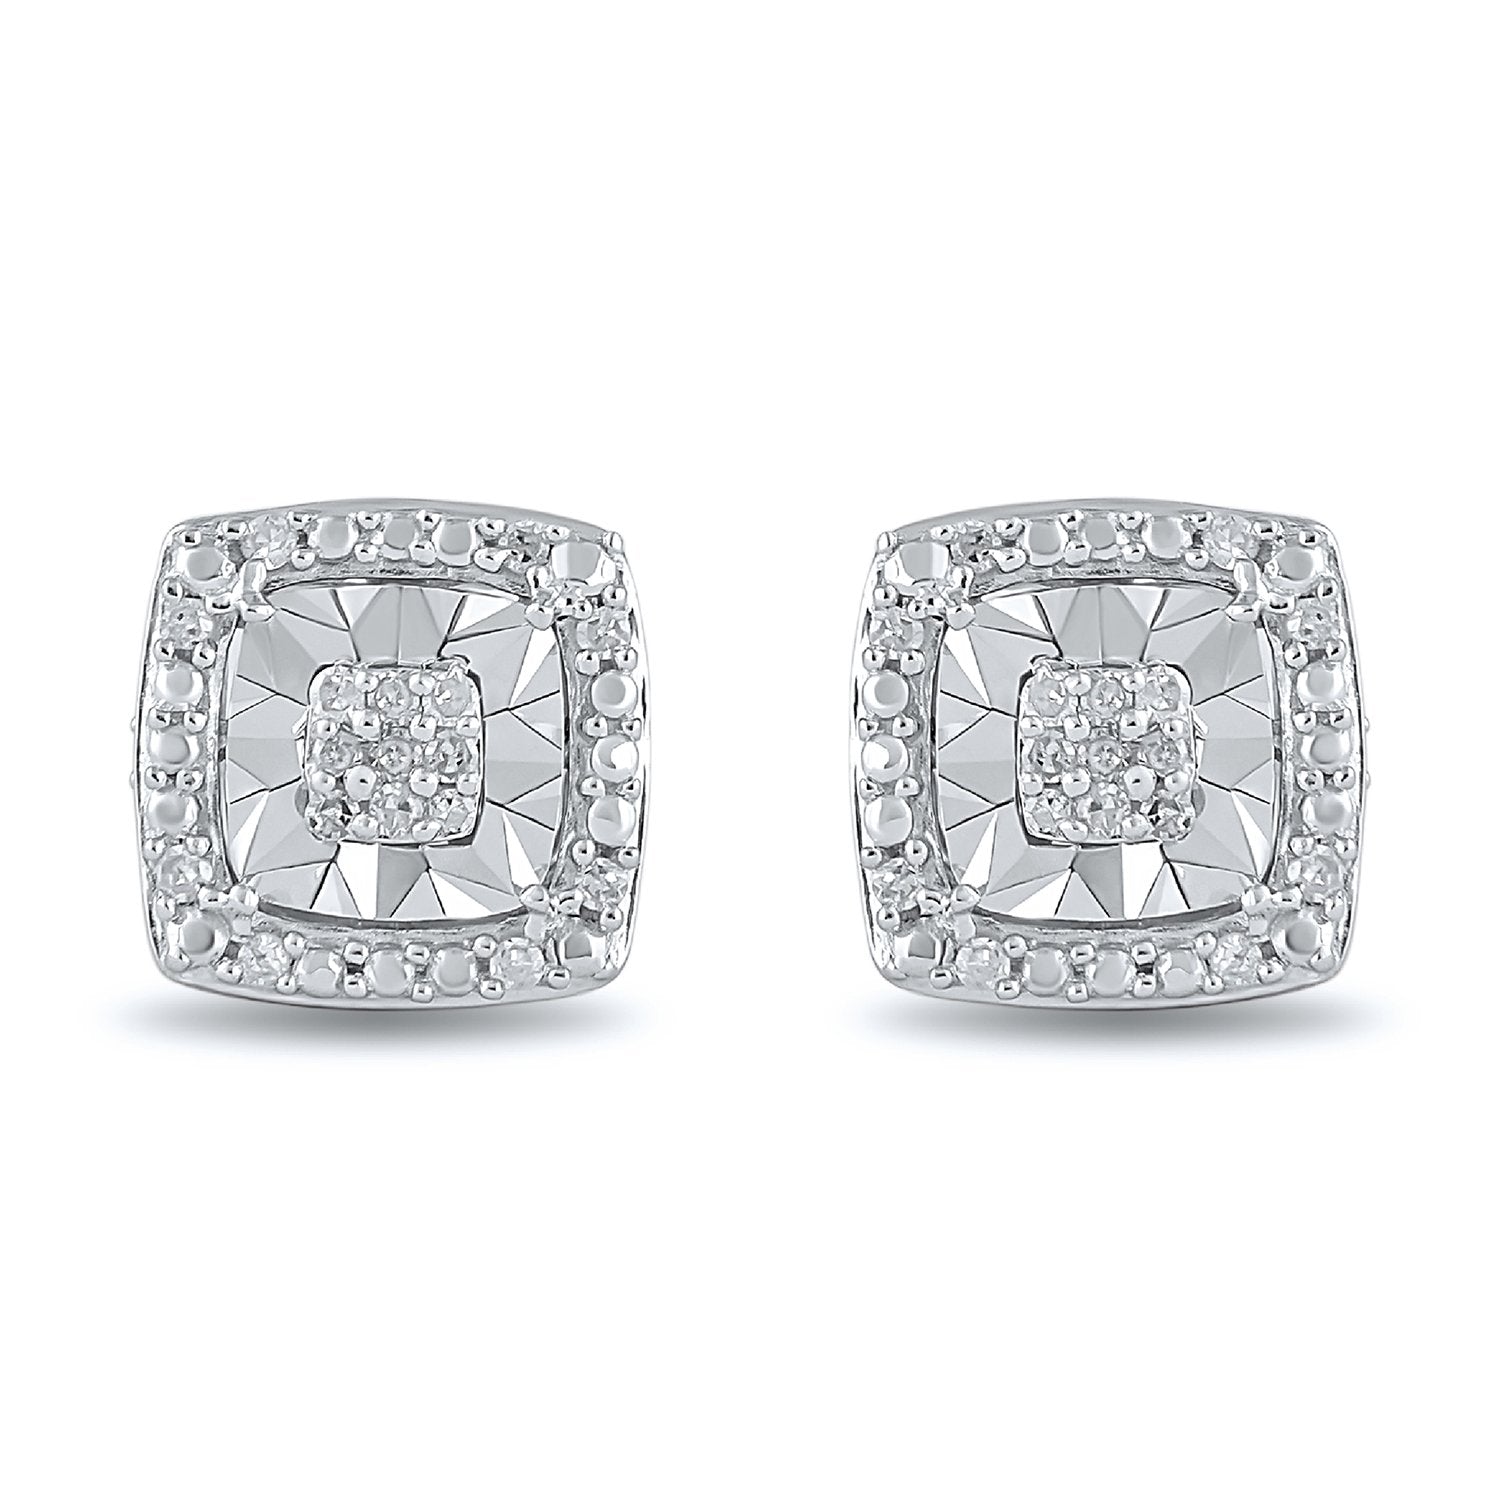 Miracle Halo Square Stud Earrings with 0.10ct of Diamonds in Sterling Silver Earrings Bevilles 